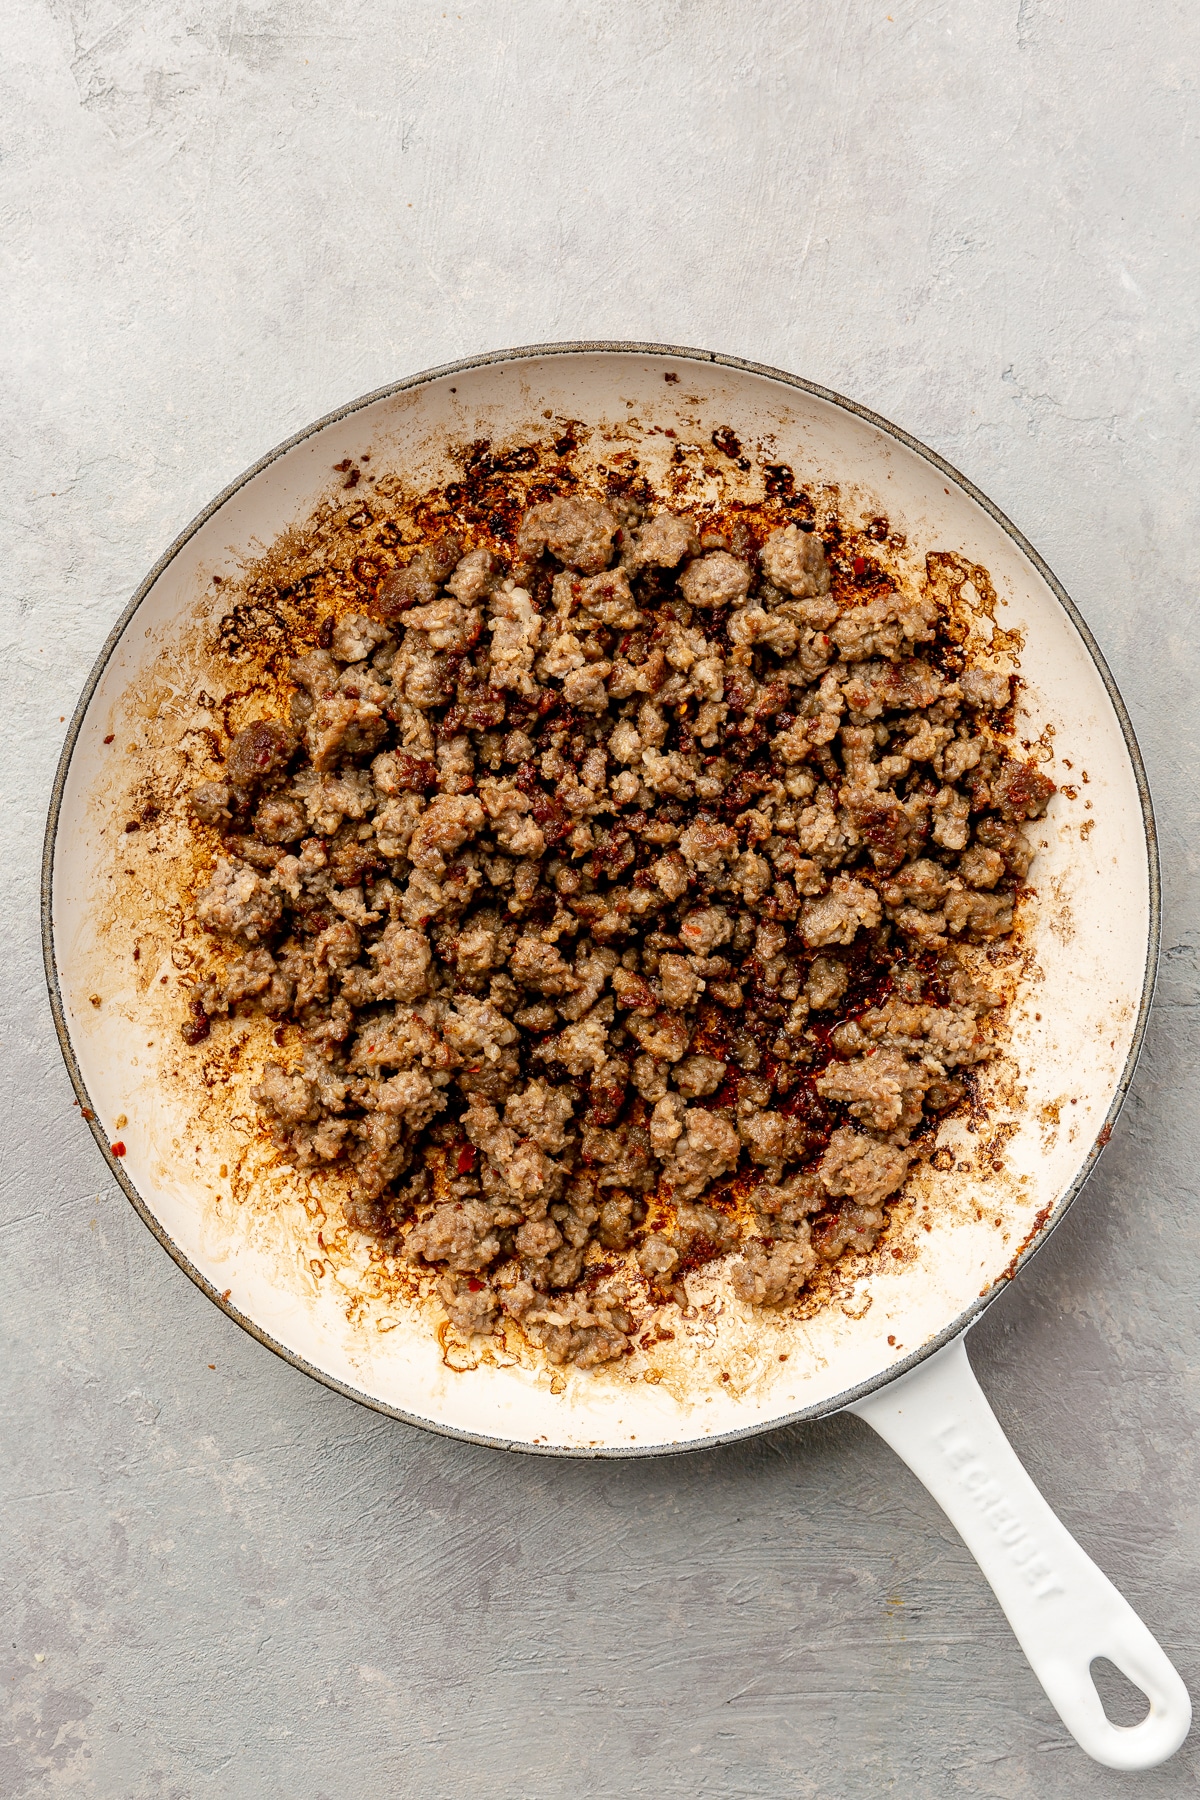 Cooked, browned, ground beef sits in a white frying pan.